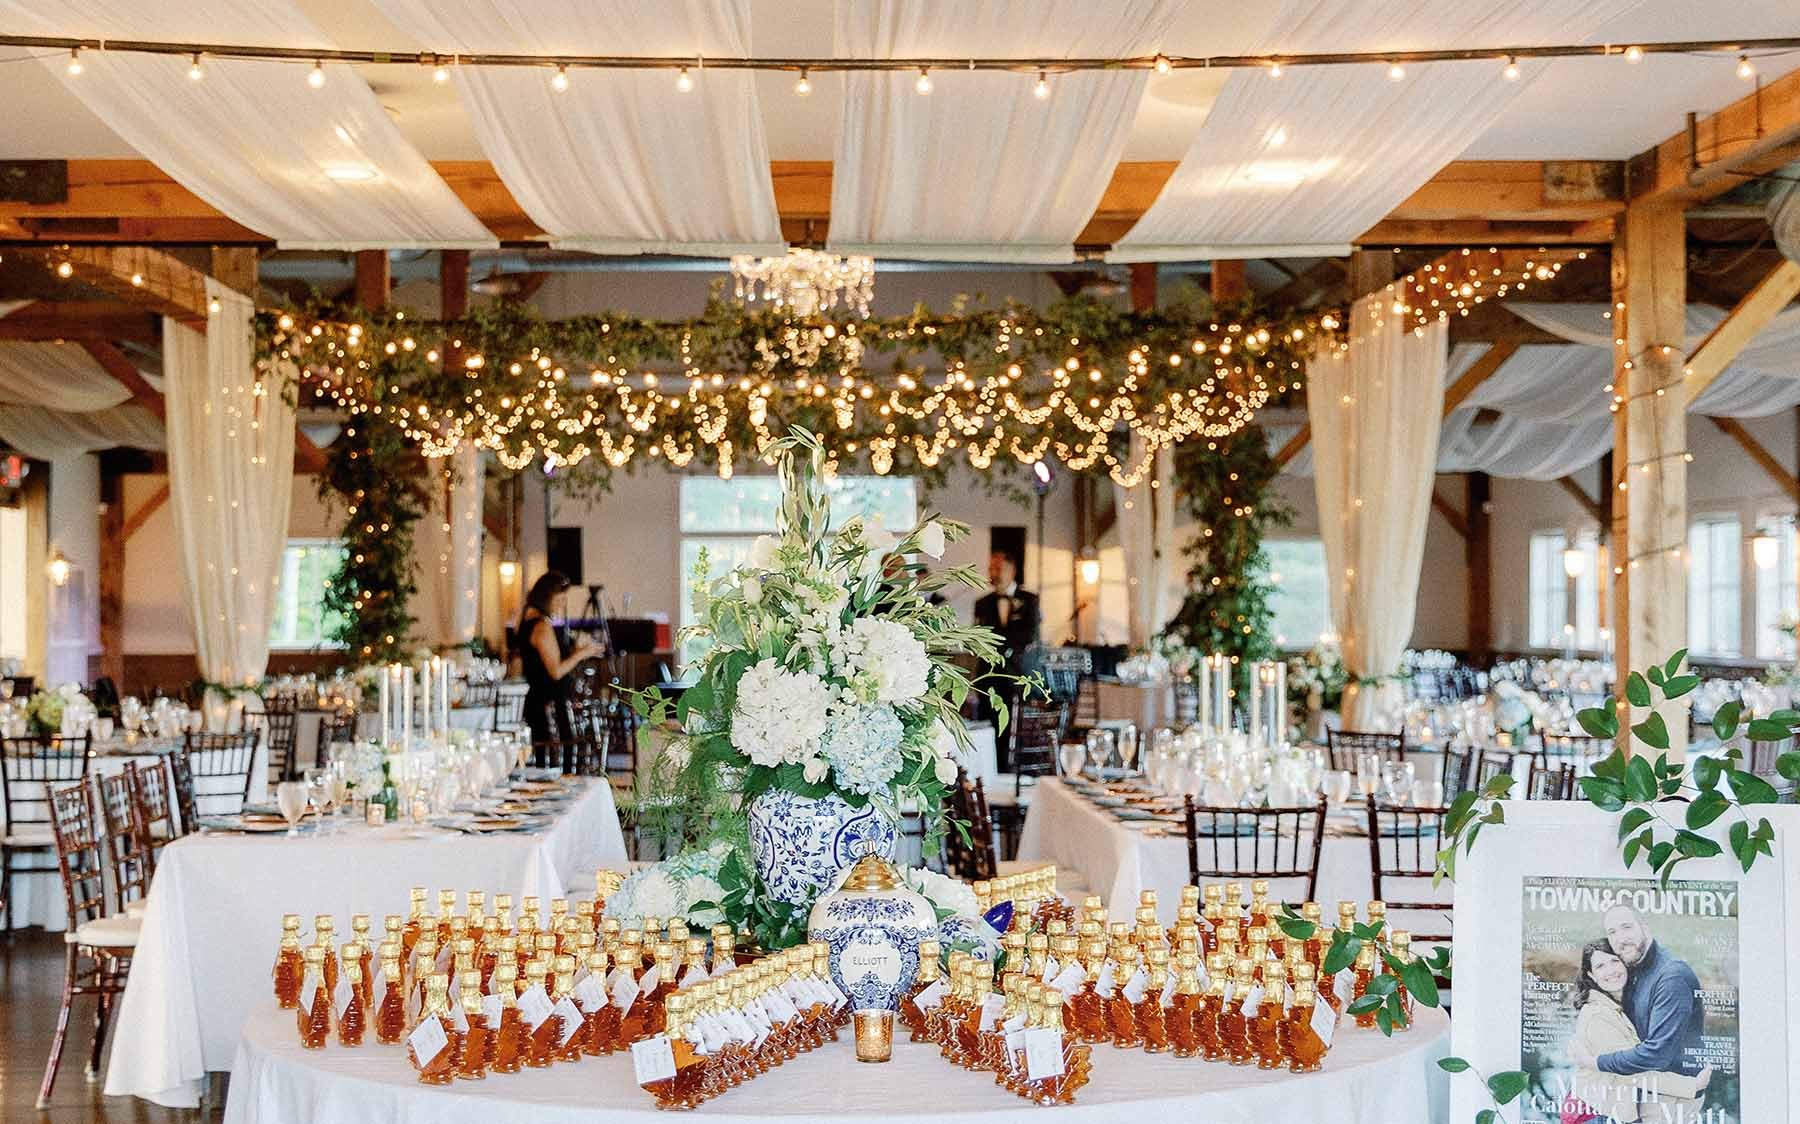 Maple syrup spread out on a table with a white linen...event decor in background with white drapery.